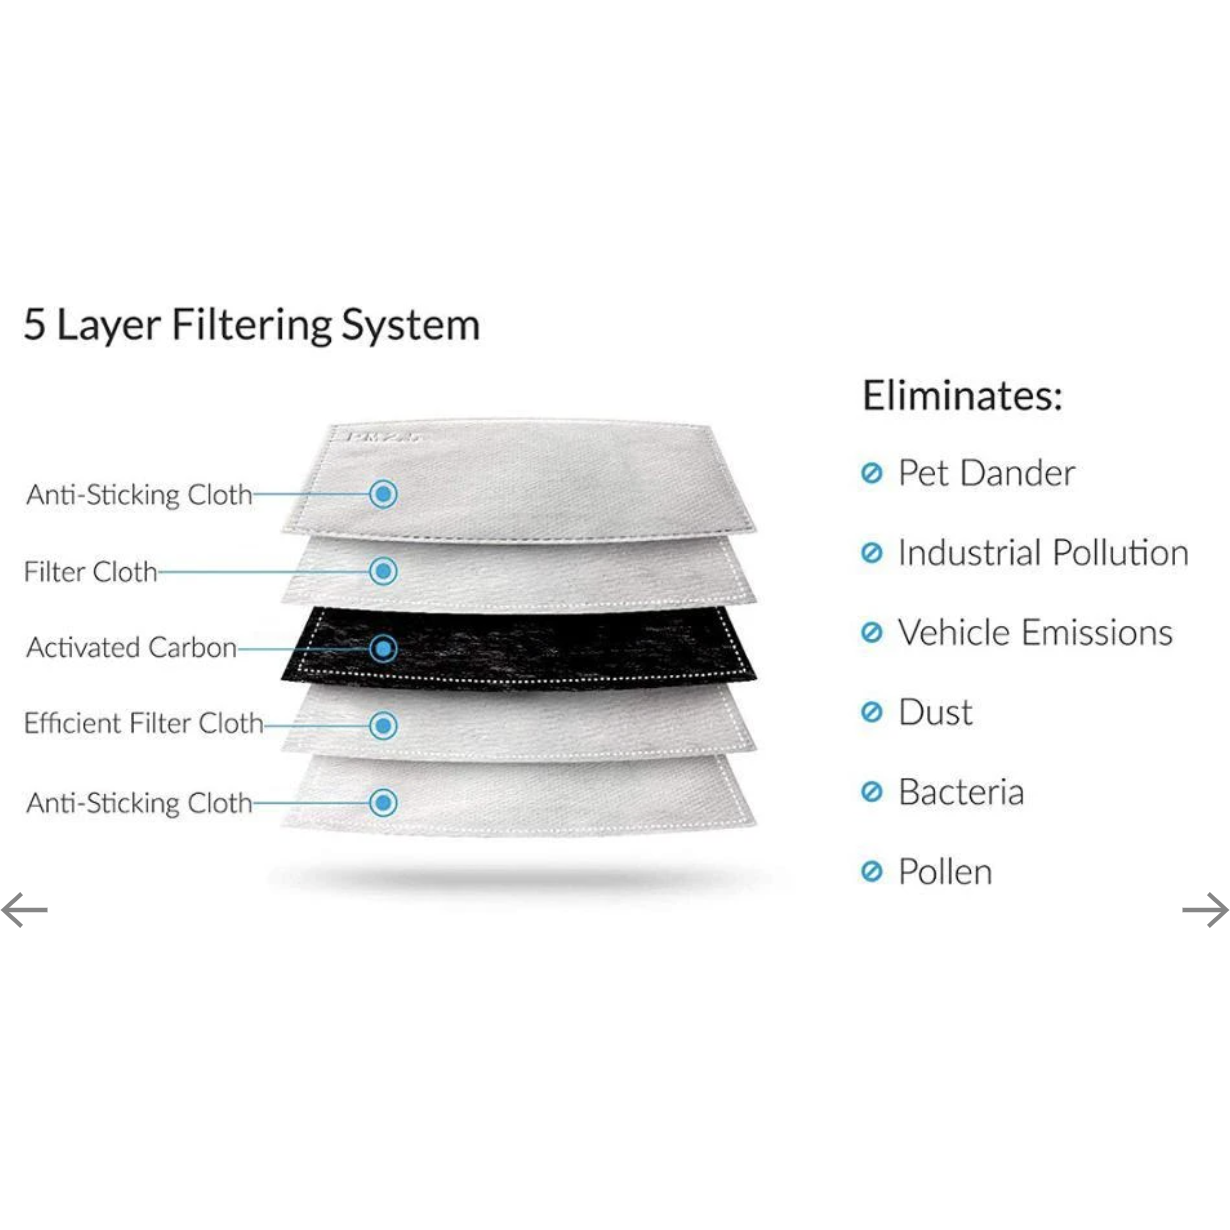 Face Mask replacement filters Pm2.5 5 layer filtering system activated carbon eliminates bacteria pollen dust pollution